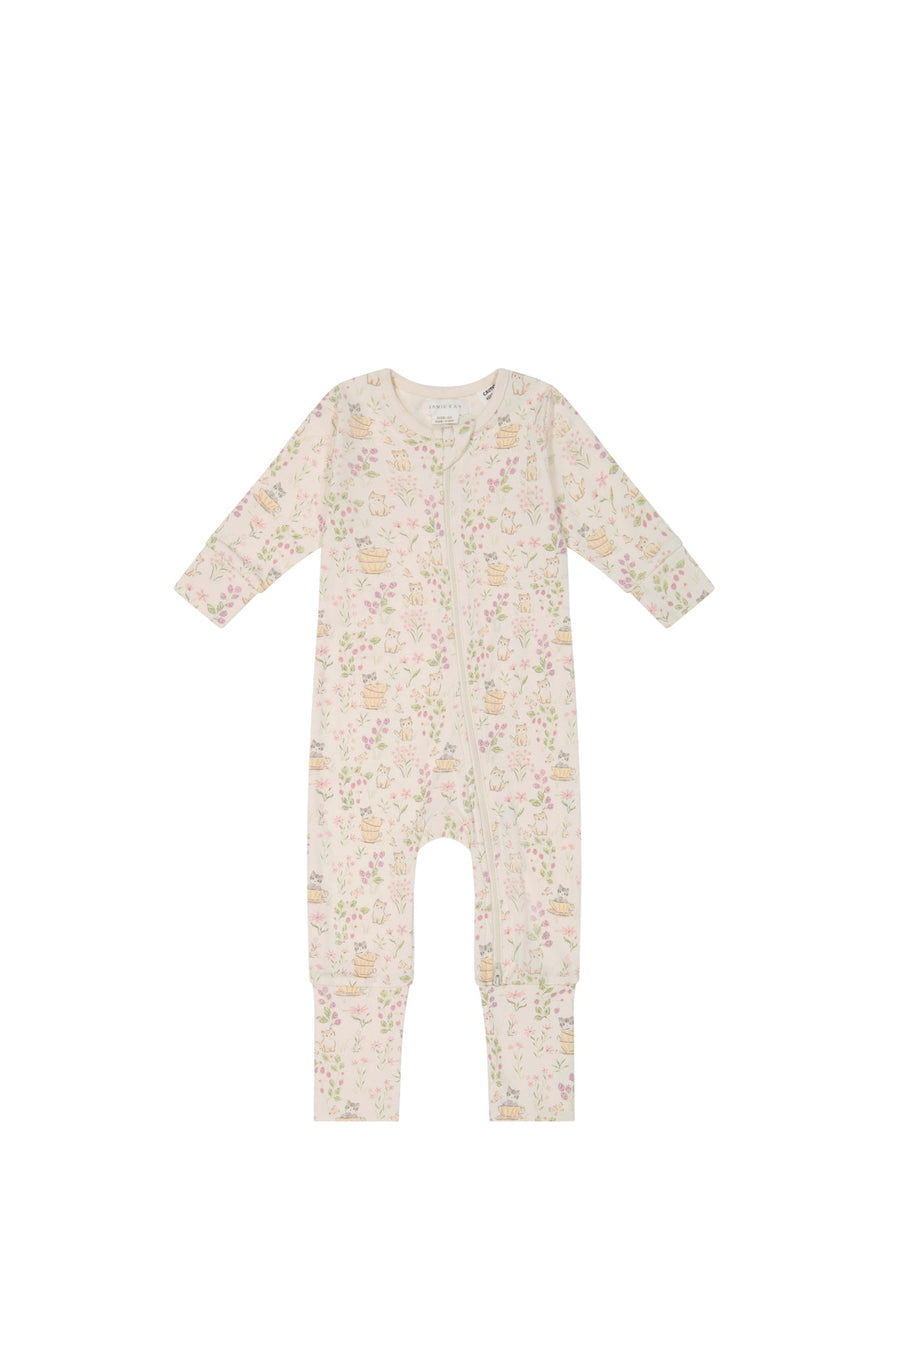 Organic Cotton Gracelyn Onepiece - Moons Garden Childrens Onepiece from Jamie Kay USA